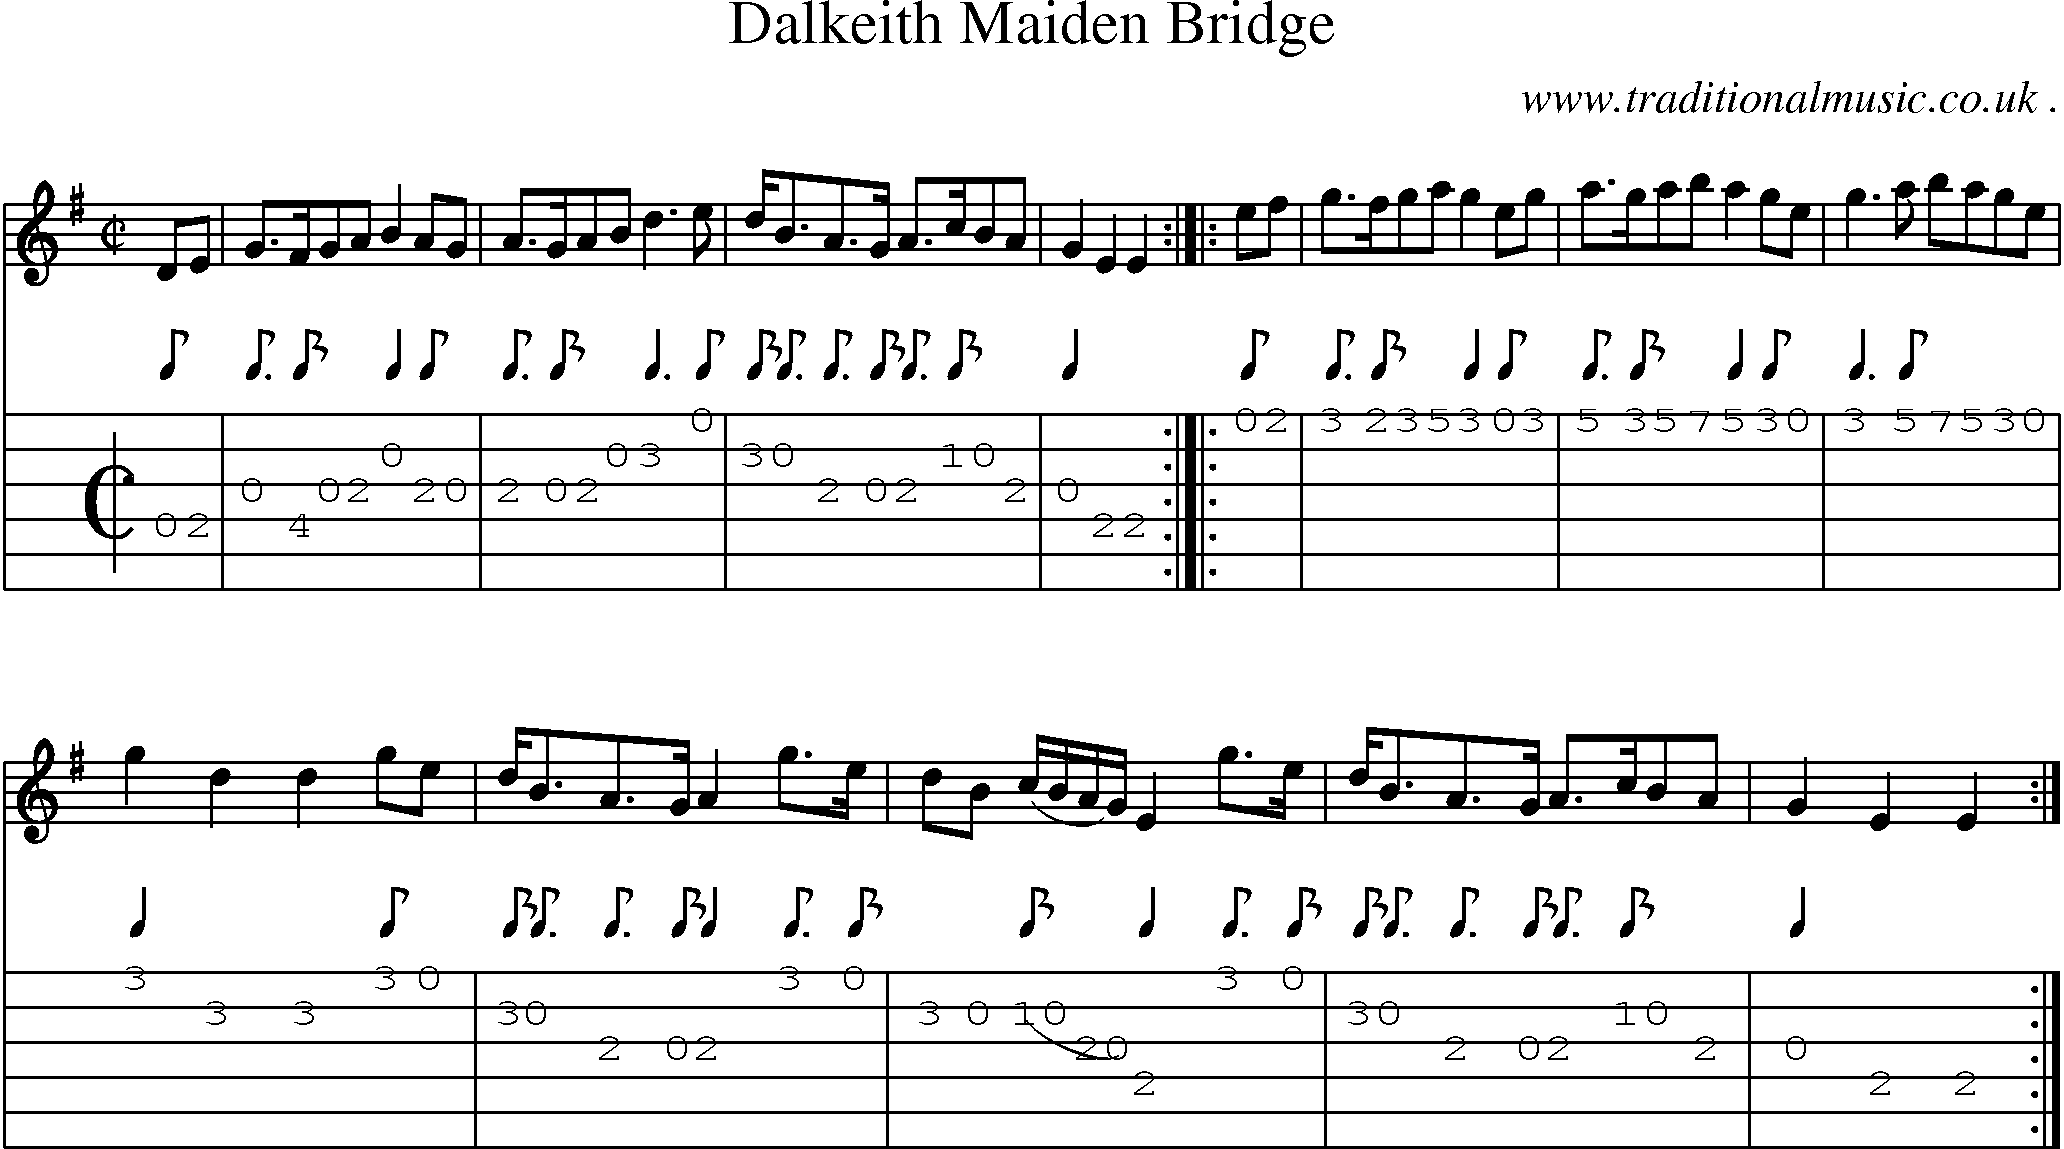 Sheet-Music and Guitar Tabs for Dalkeith Maiden Bridge